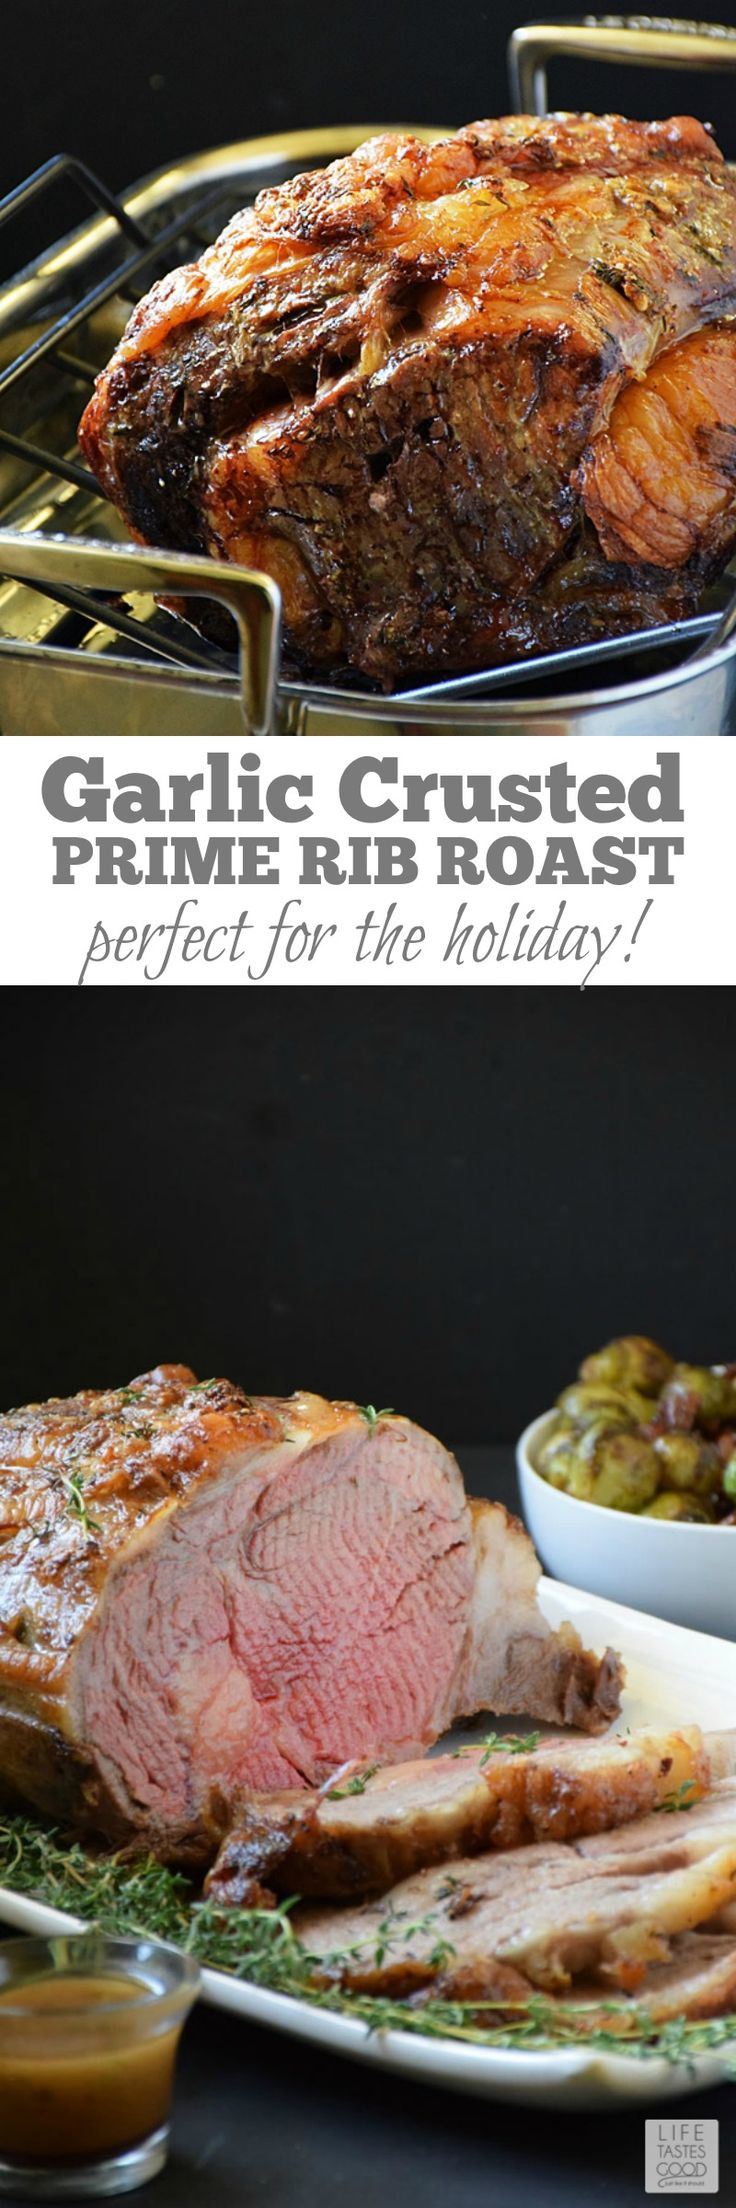 Side Dishes For Prime Rib Dinner Christmas
 25 best ideas about Christmas Dinner Menu on Pinterest